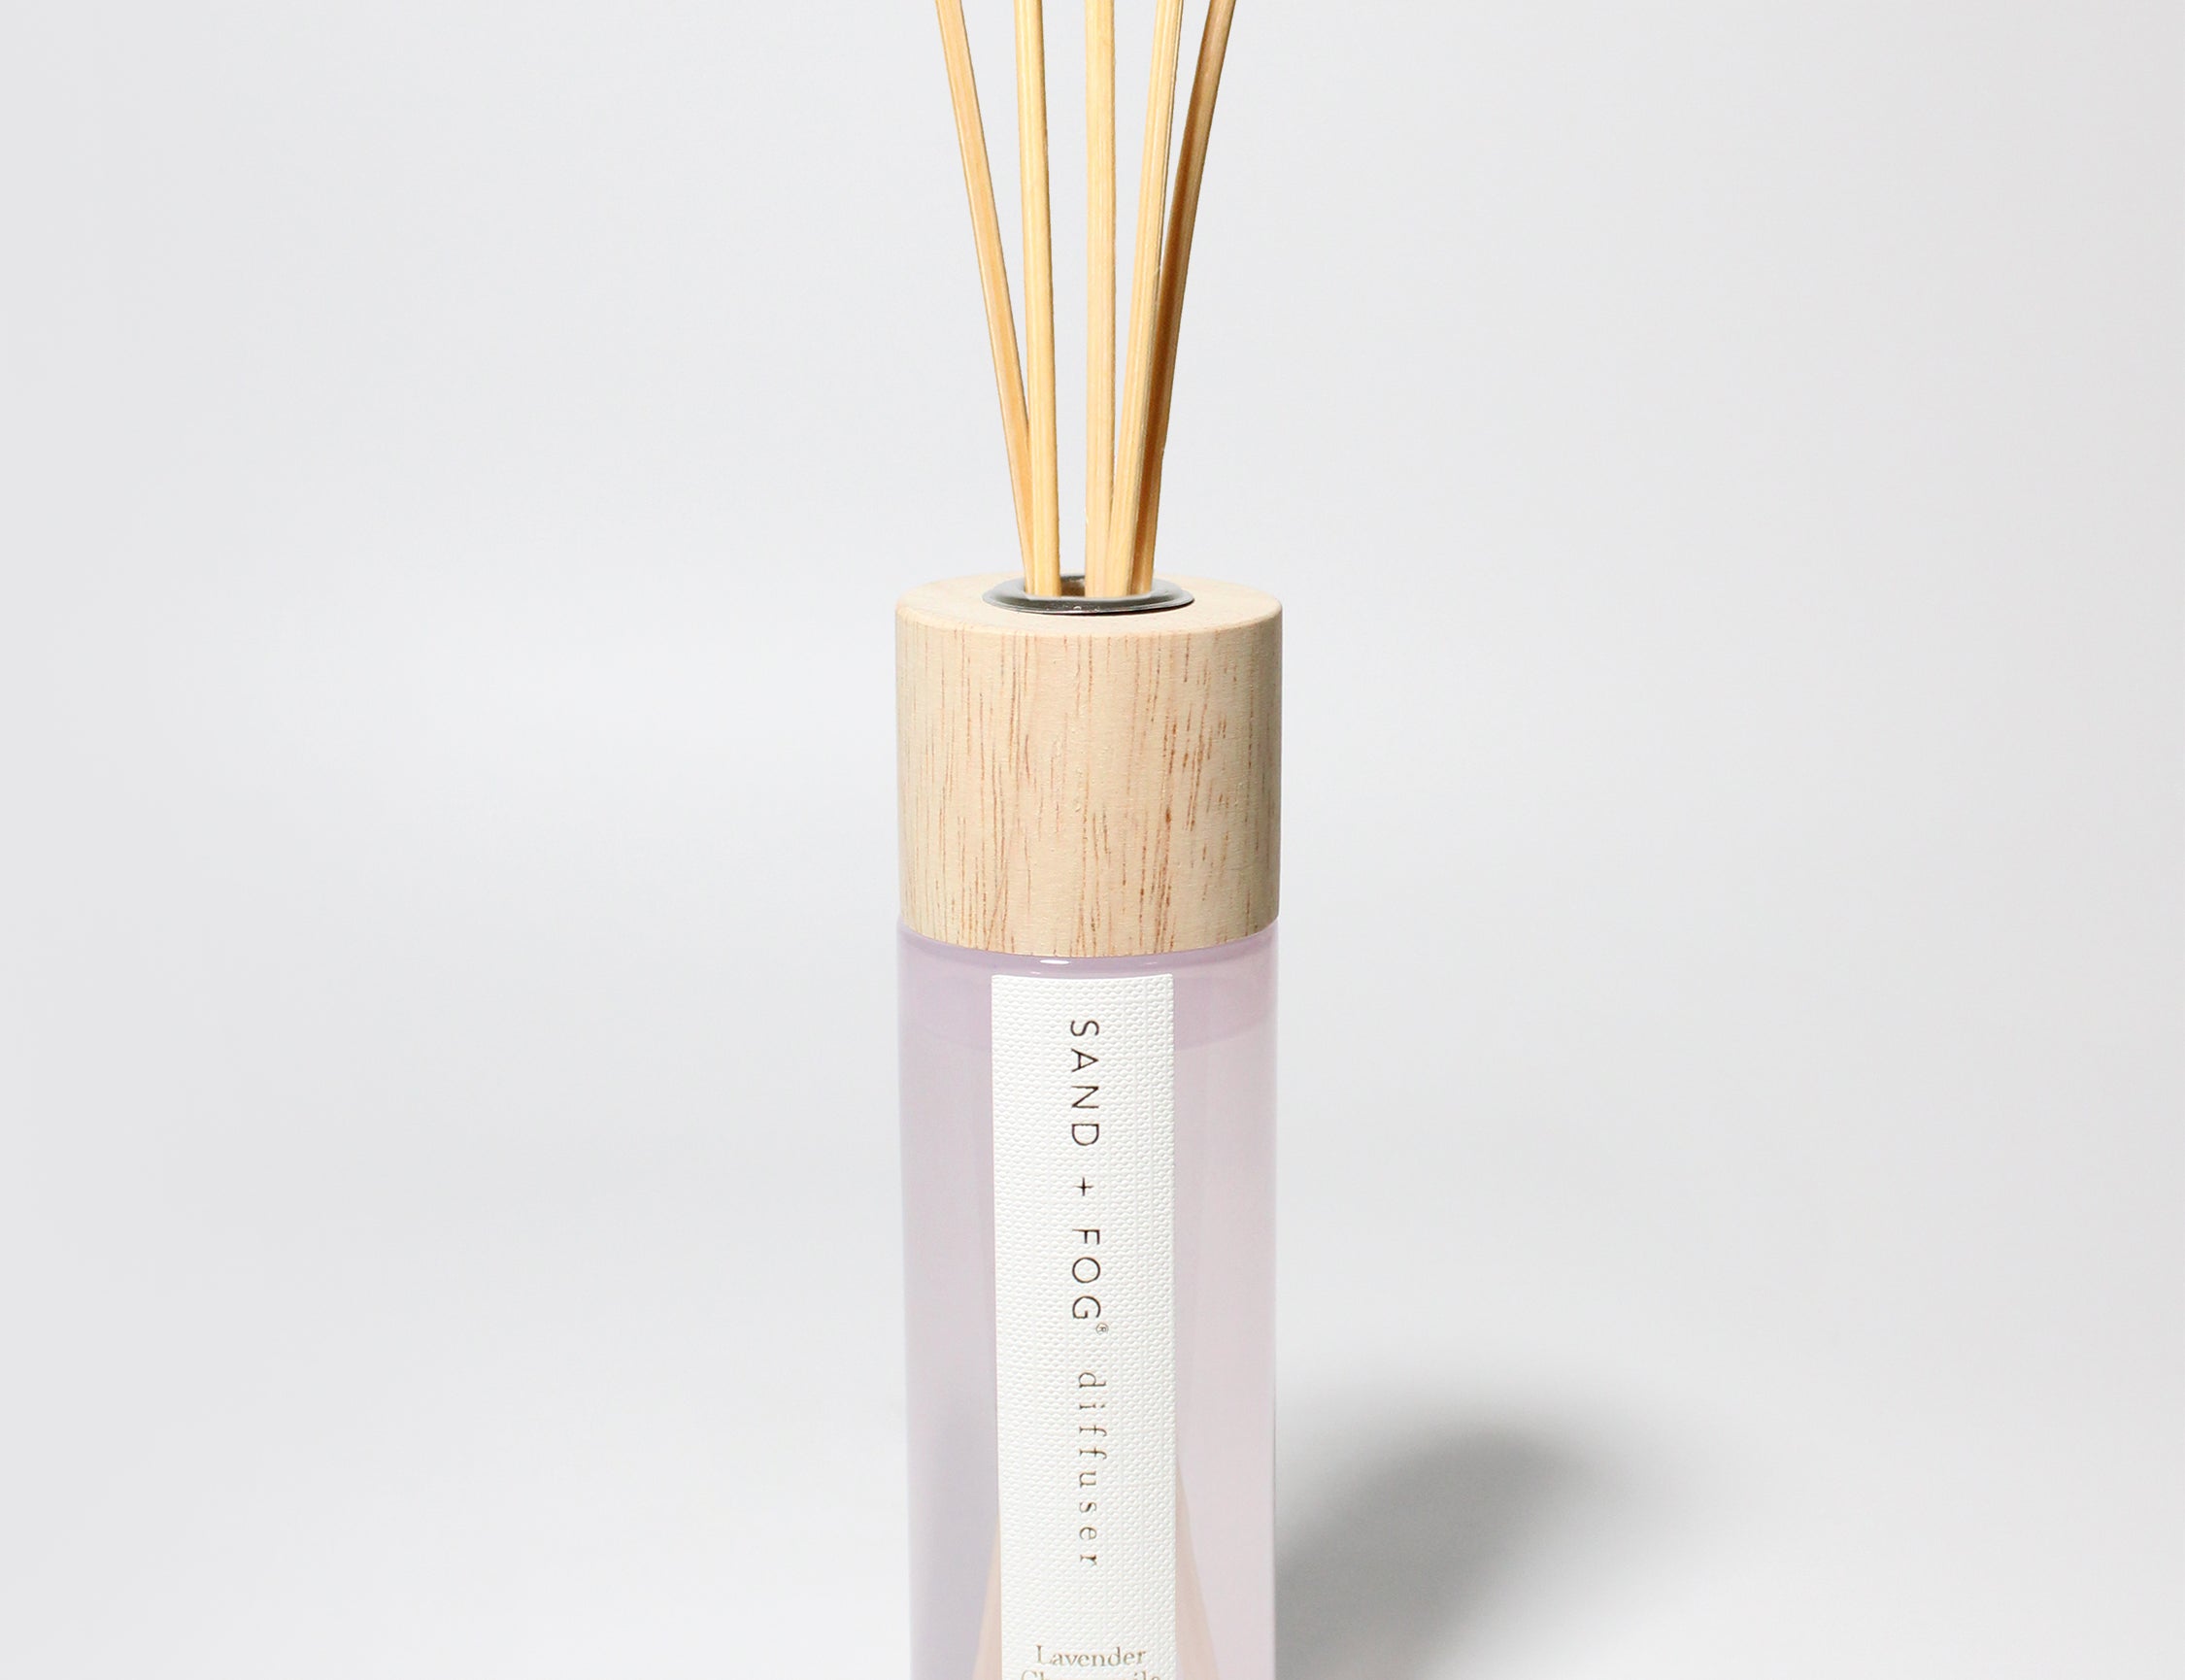 Lavender Chamomile reed diffuser Light Purple Glass with Wood top